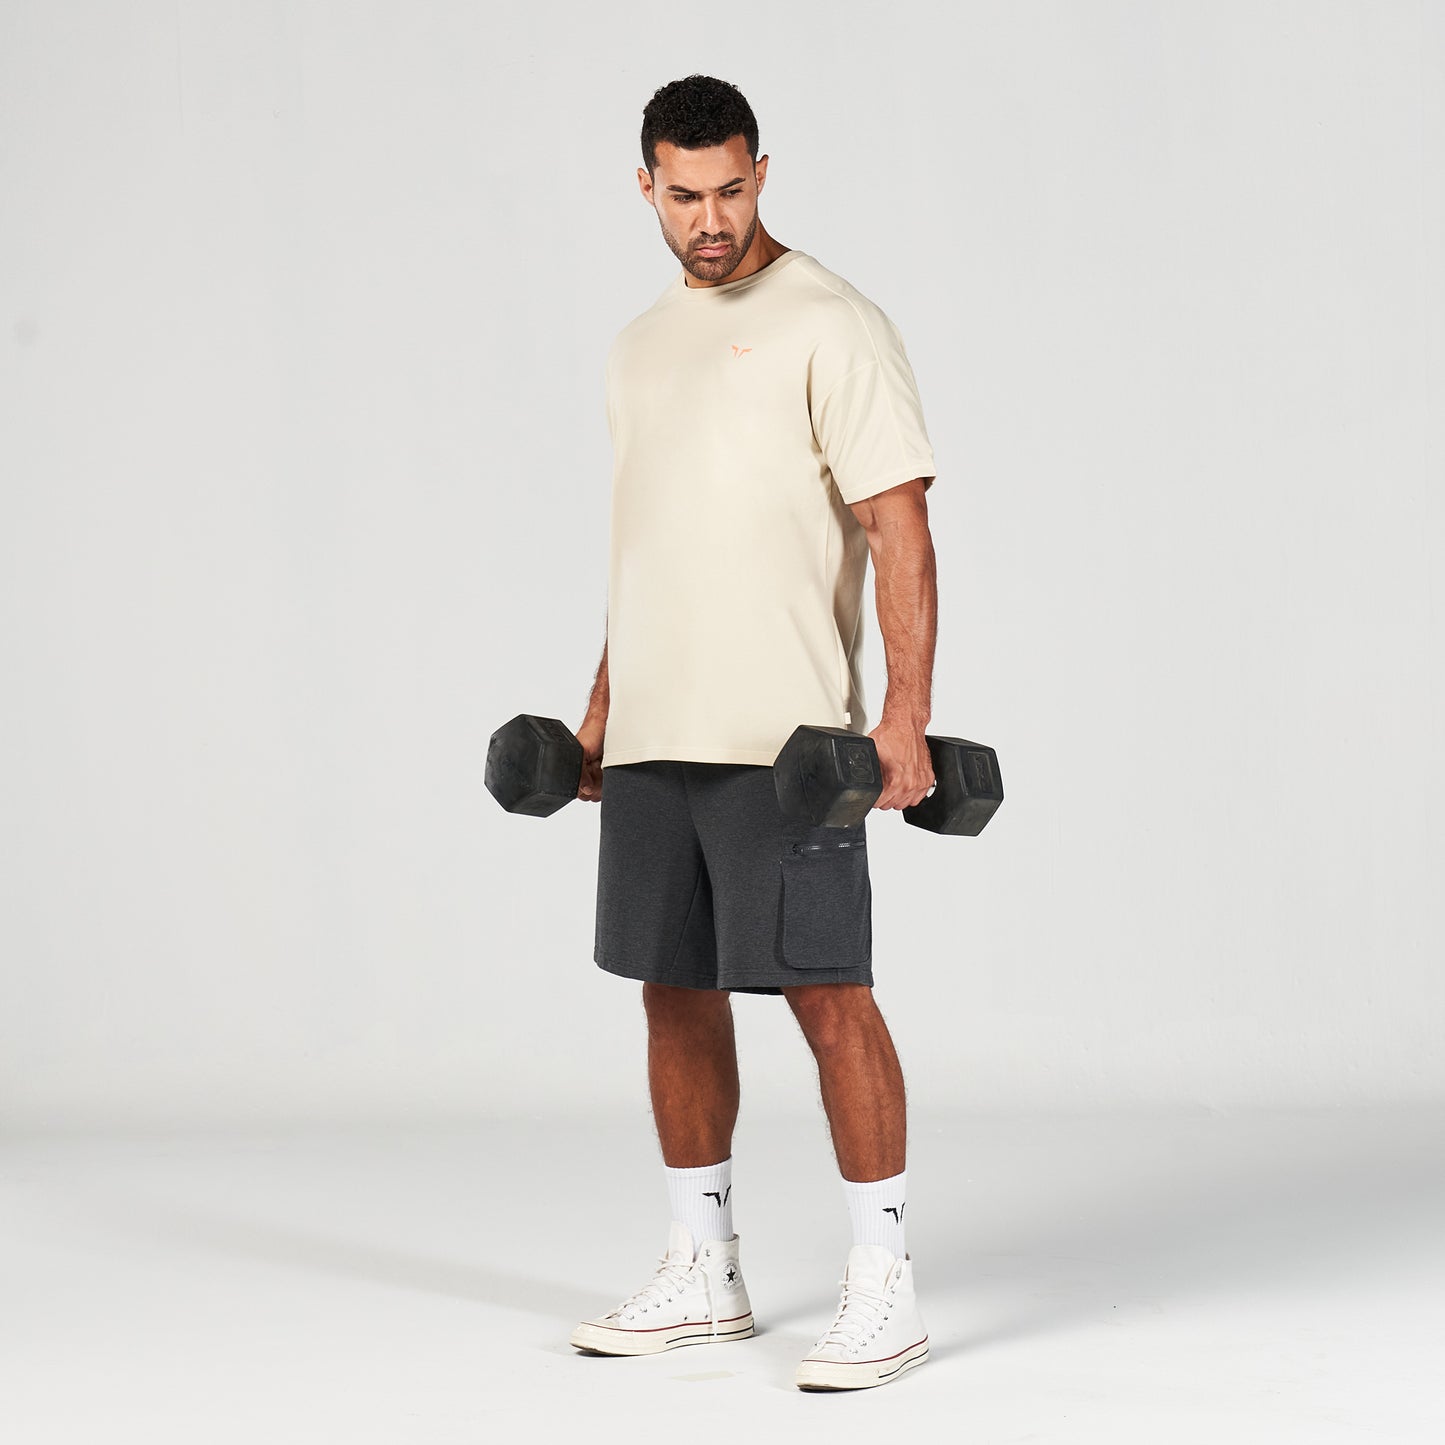 squatwolf-gym-wear-golden-era-legacy-oversized-tee-brown-rice-workout-shirts-for-men